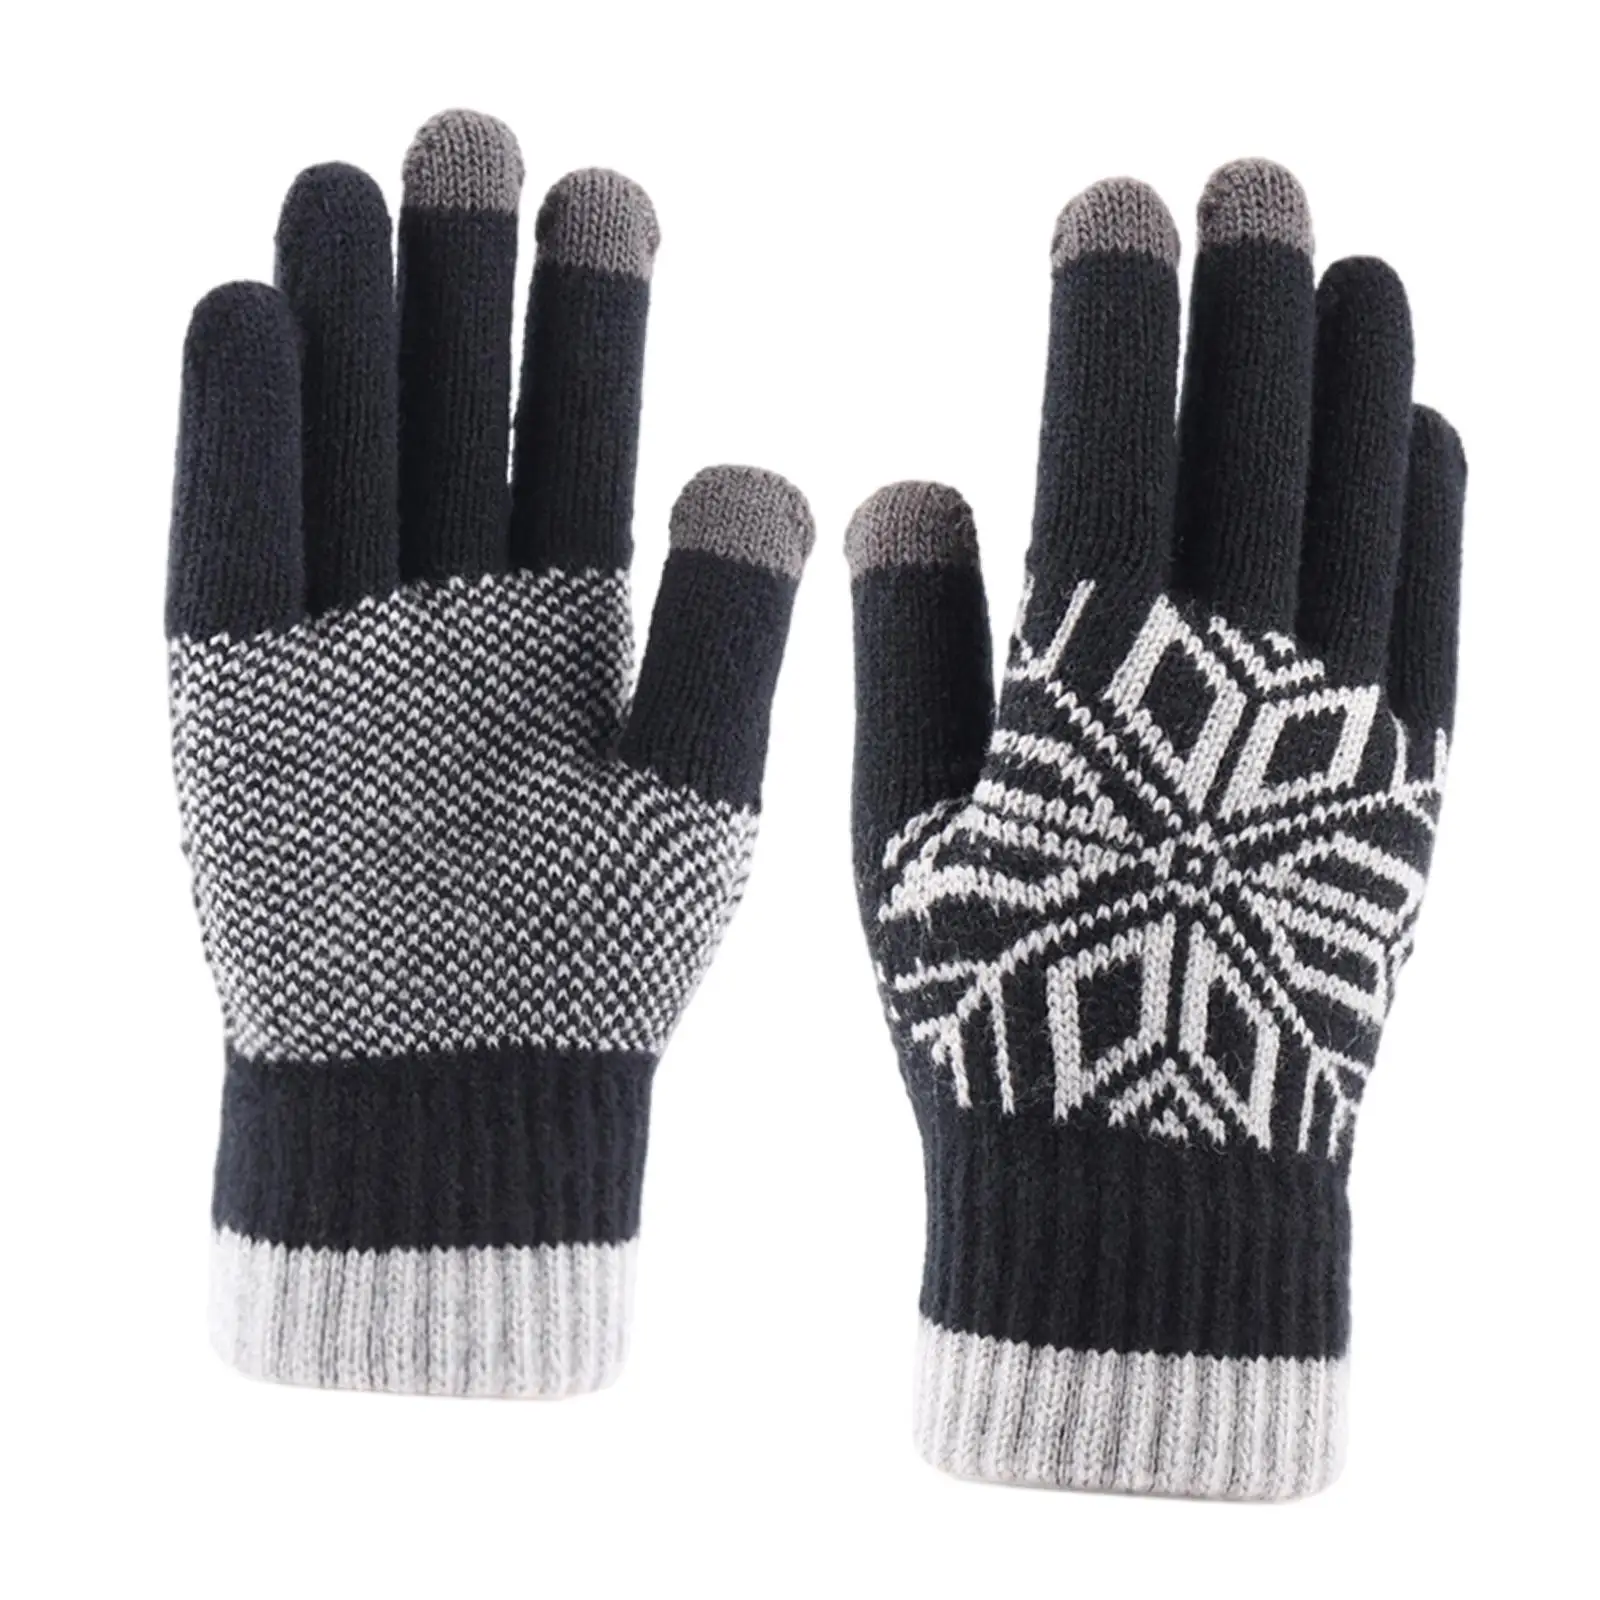 Winter Warm Gloves Touch Screen Mitten Texting Gloves for Skiing